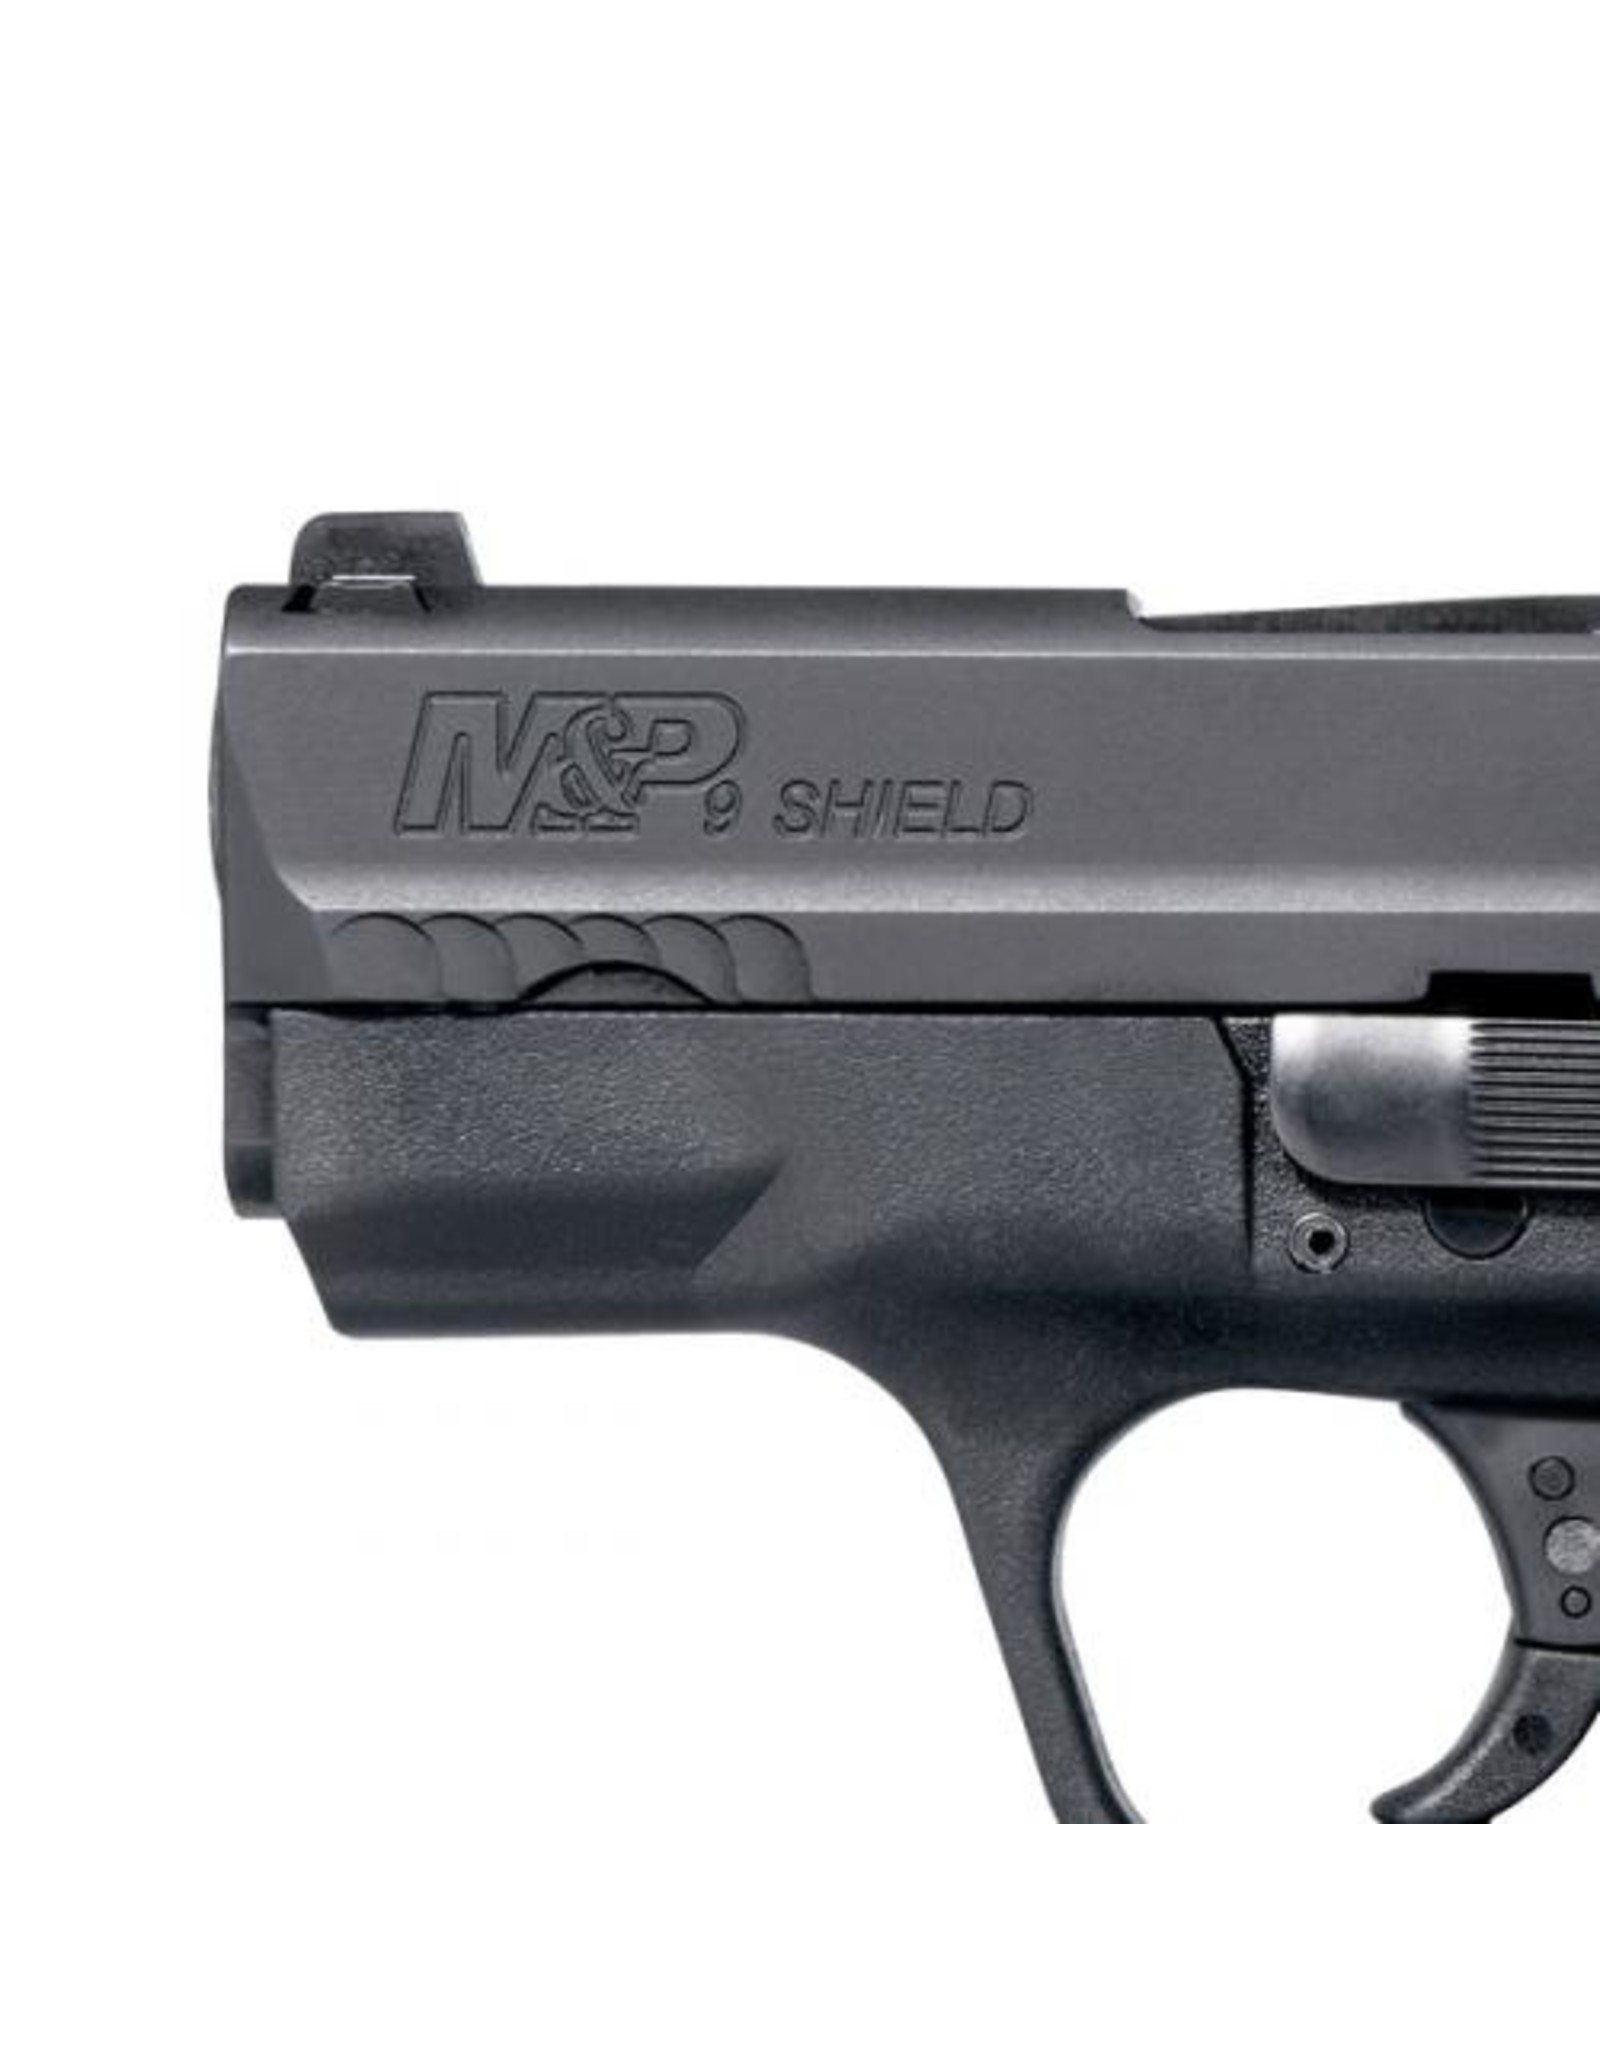 SMITH & WESSON Smith & Wesson M&P 9 Shield M2.0 9mm